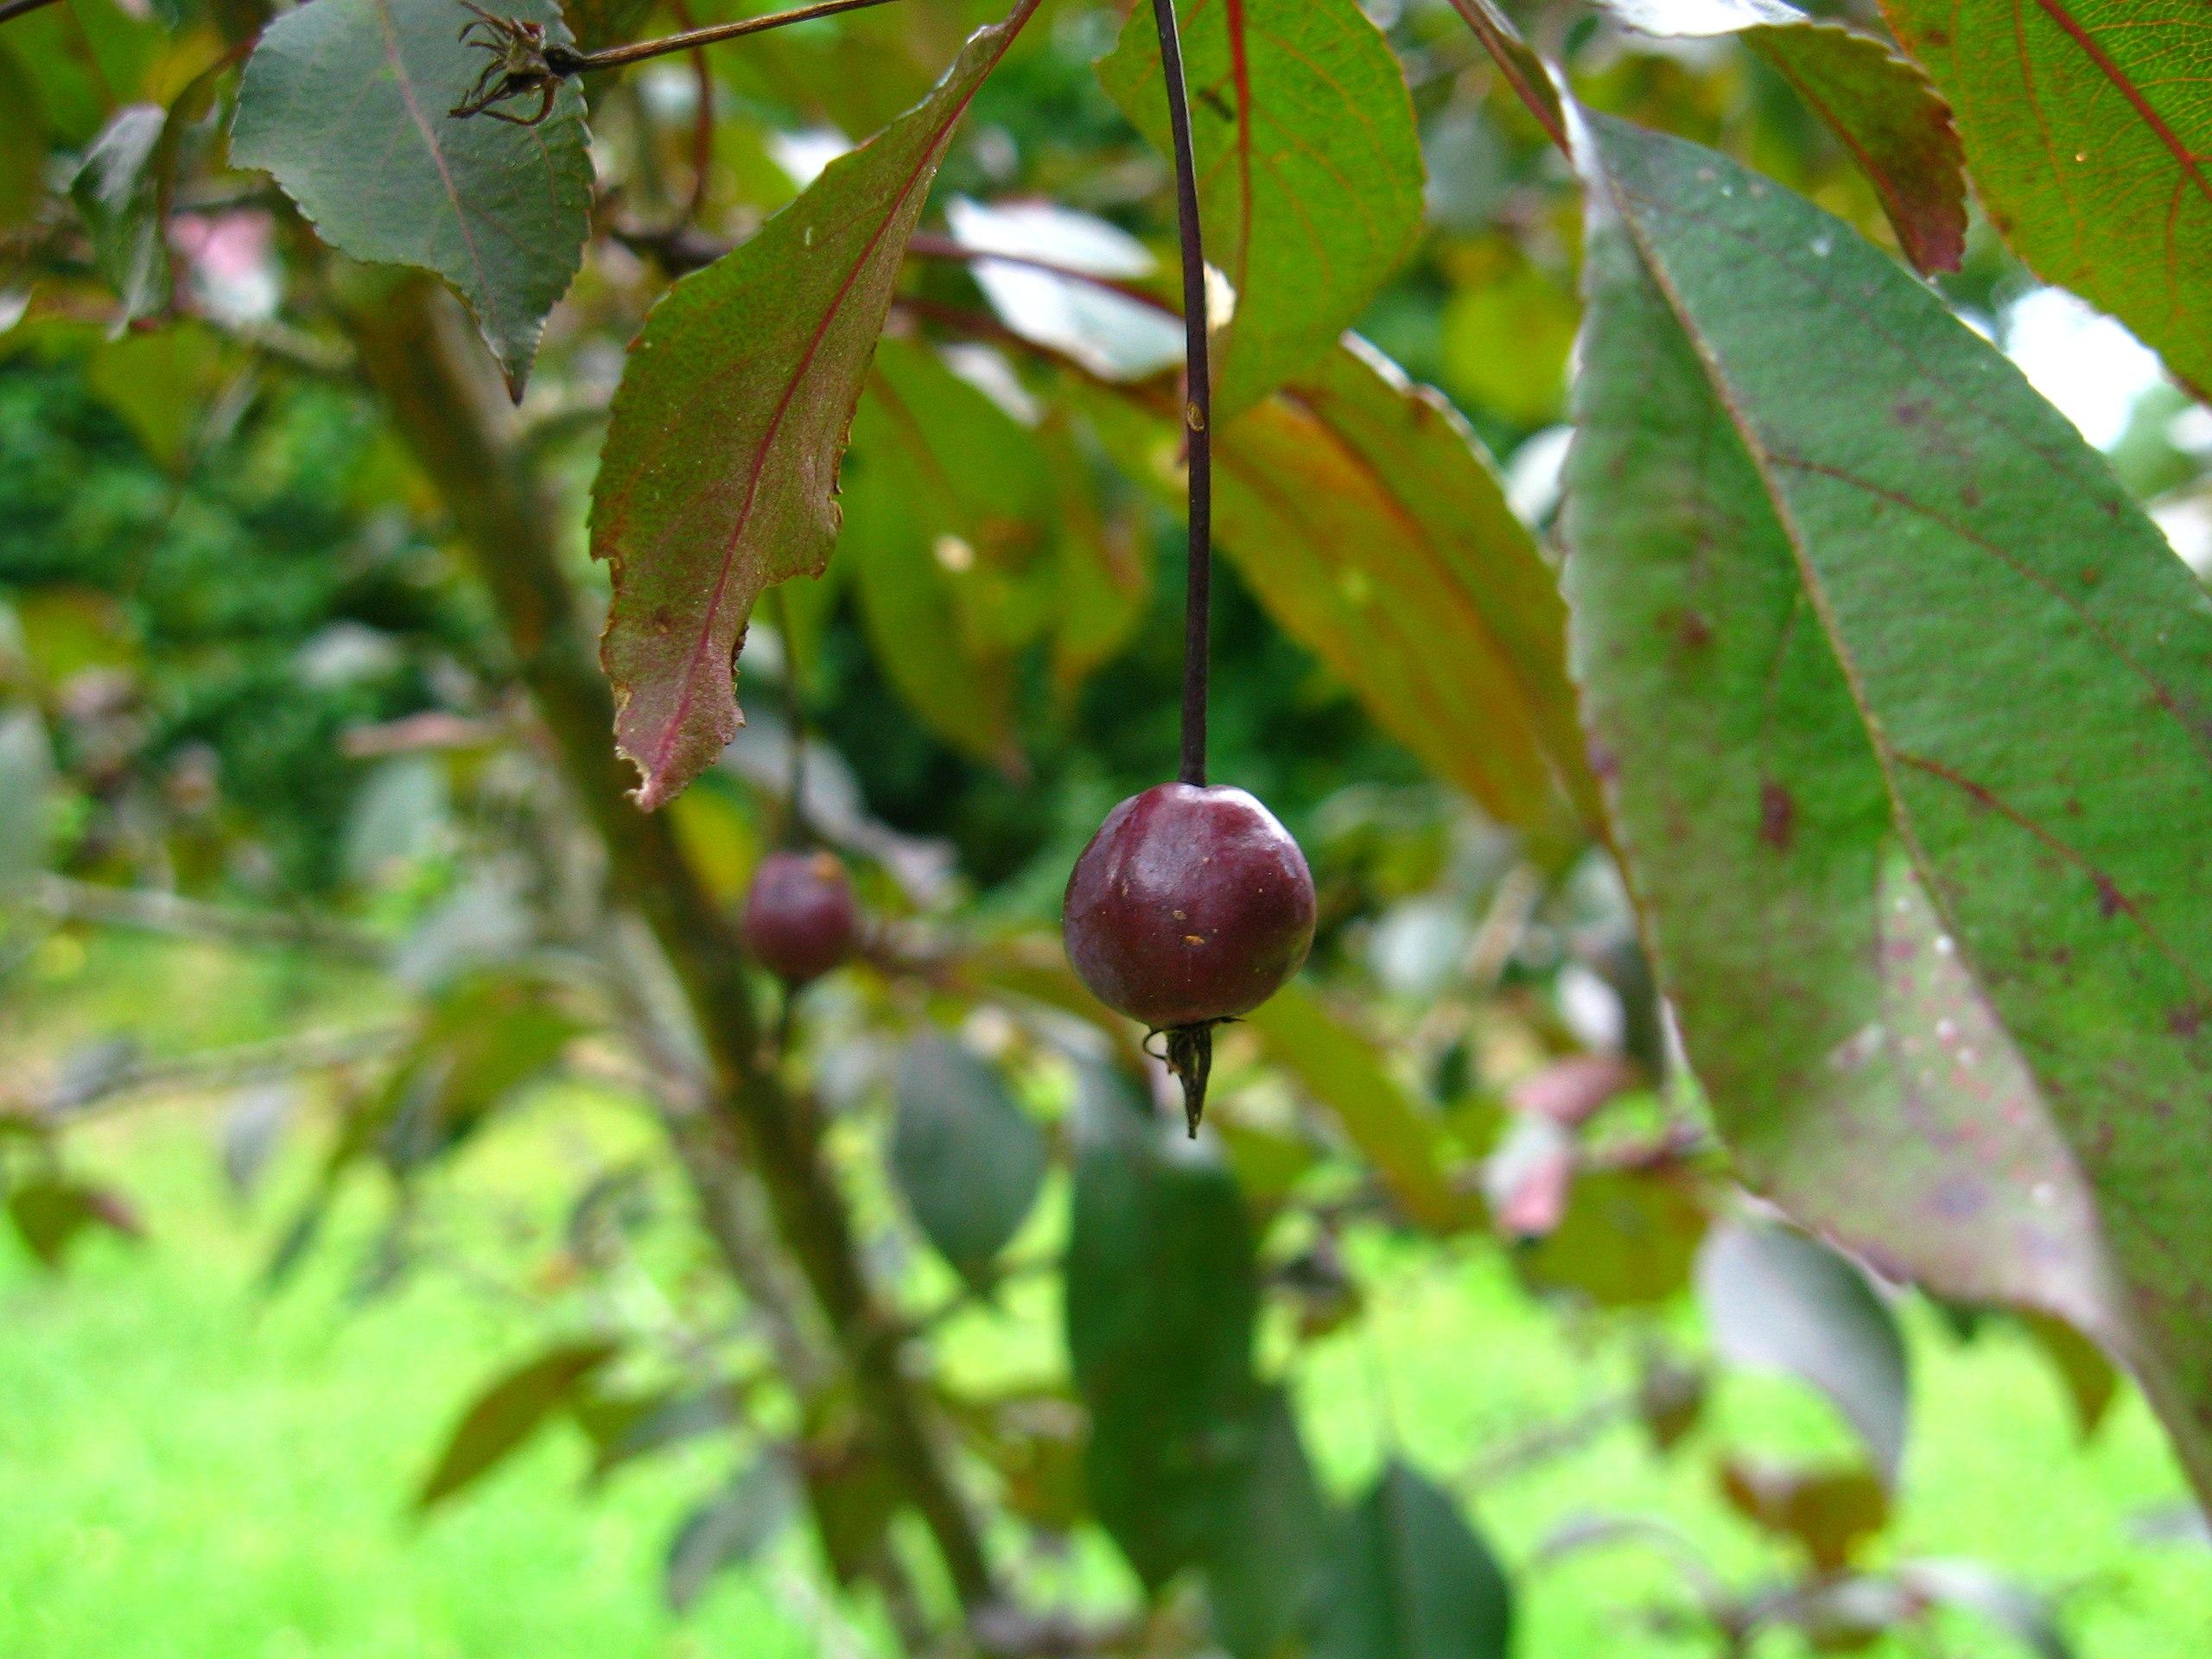 burgundy fruits with pink-green leaves, brown stems and branches